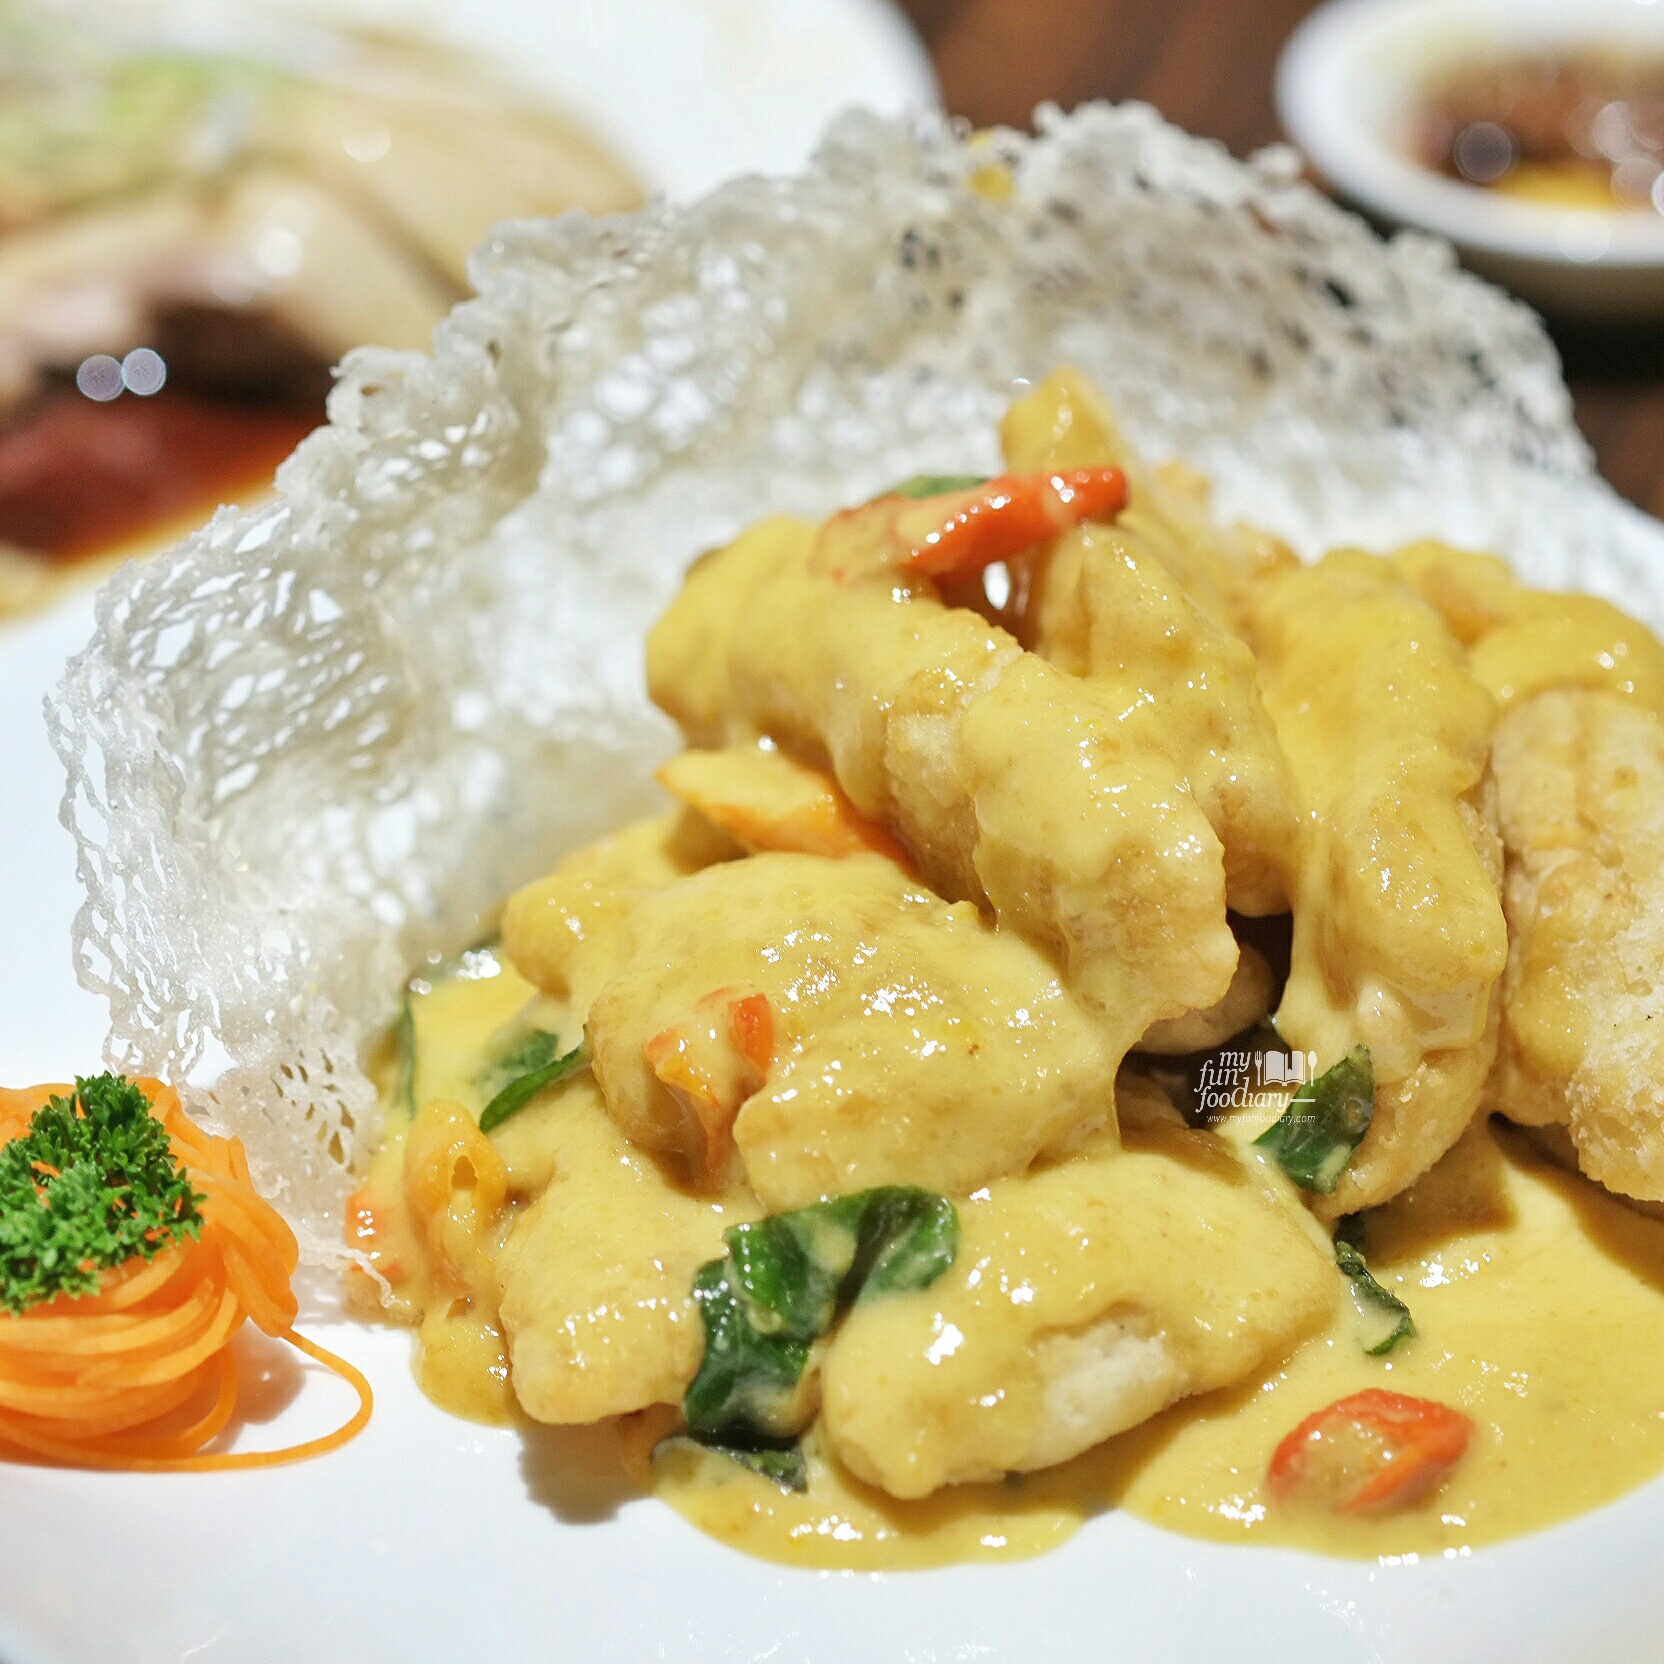 Goreng Ikan Dori Telur Asin at Three in One Cafe and Bistro by Myfunfoodiary 01